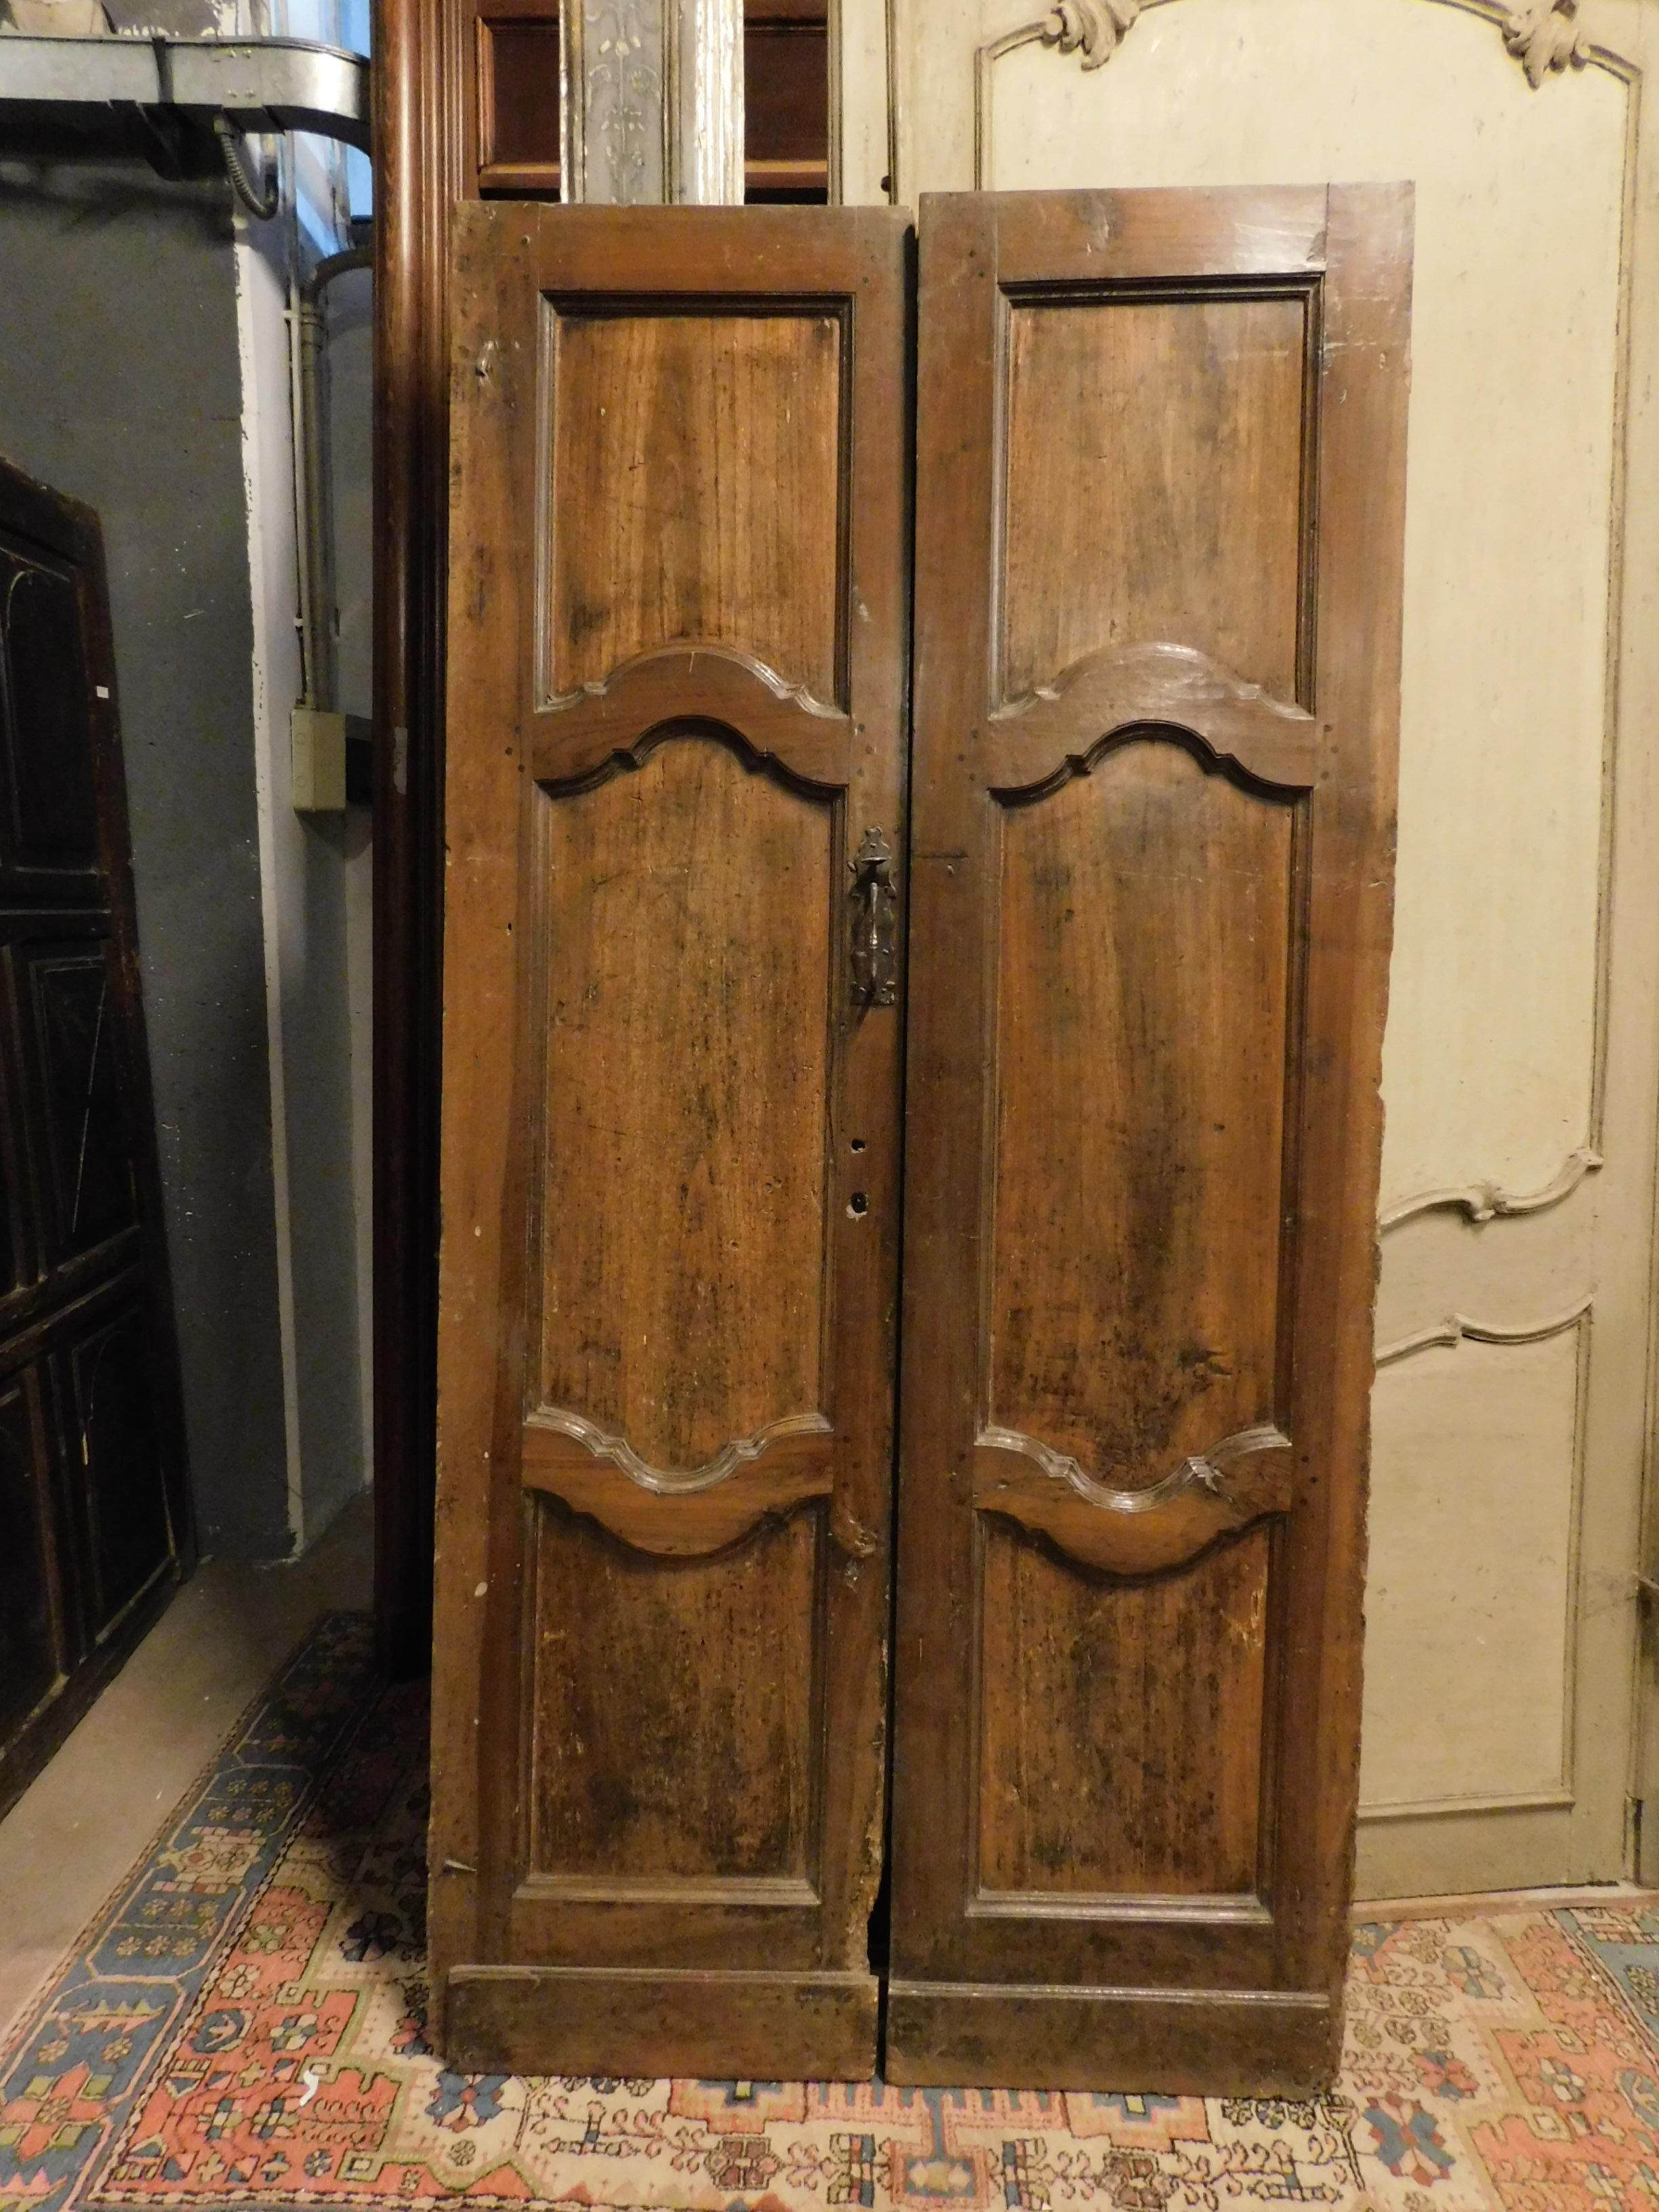 Antique double-leaf poplar door, for indoor use, hand-sculpted in the middle of the 18th century, typical panel and panel from Piedmont (northern Italy), still with beautiful butterfly irons and original handle with pop-up mechanism, in excellent